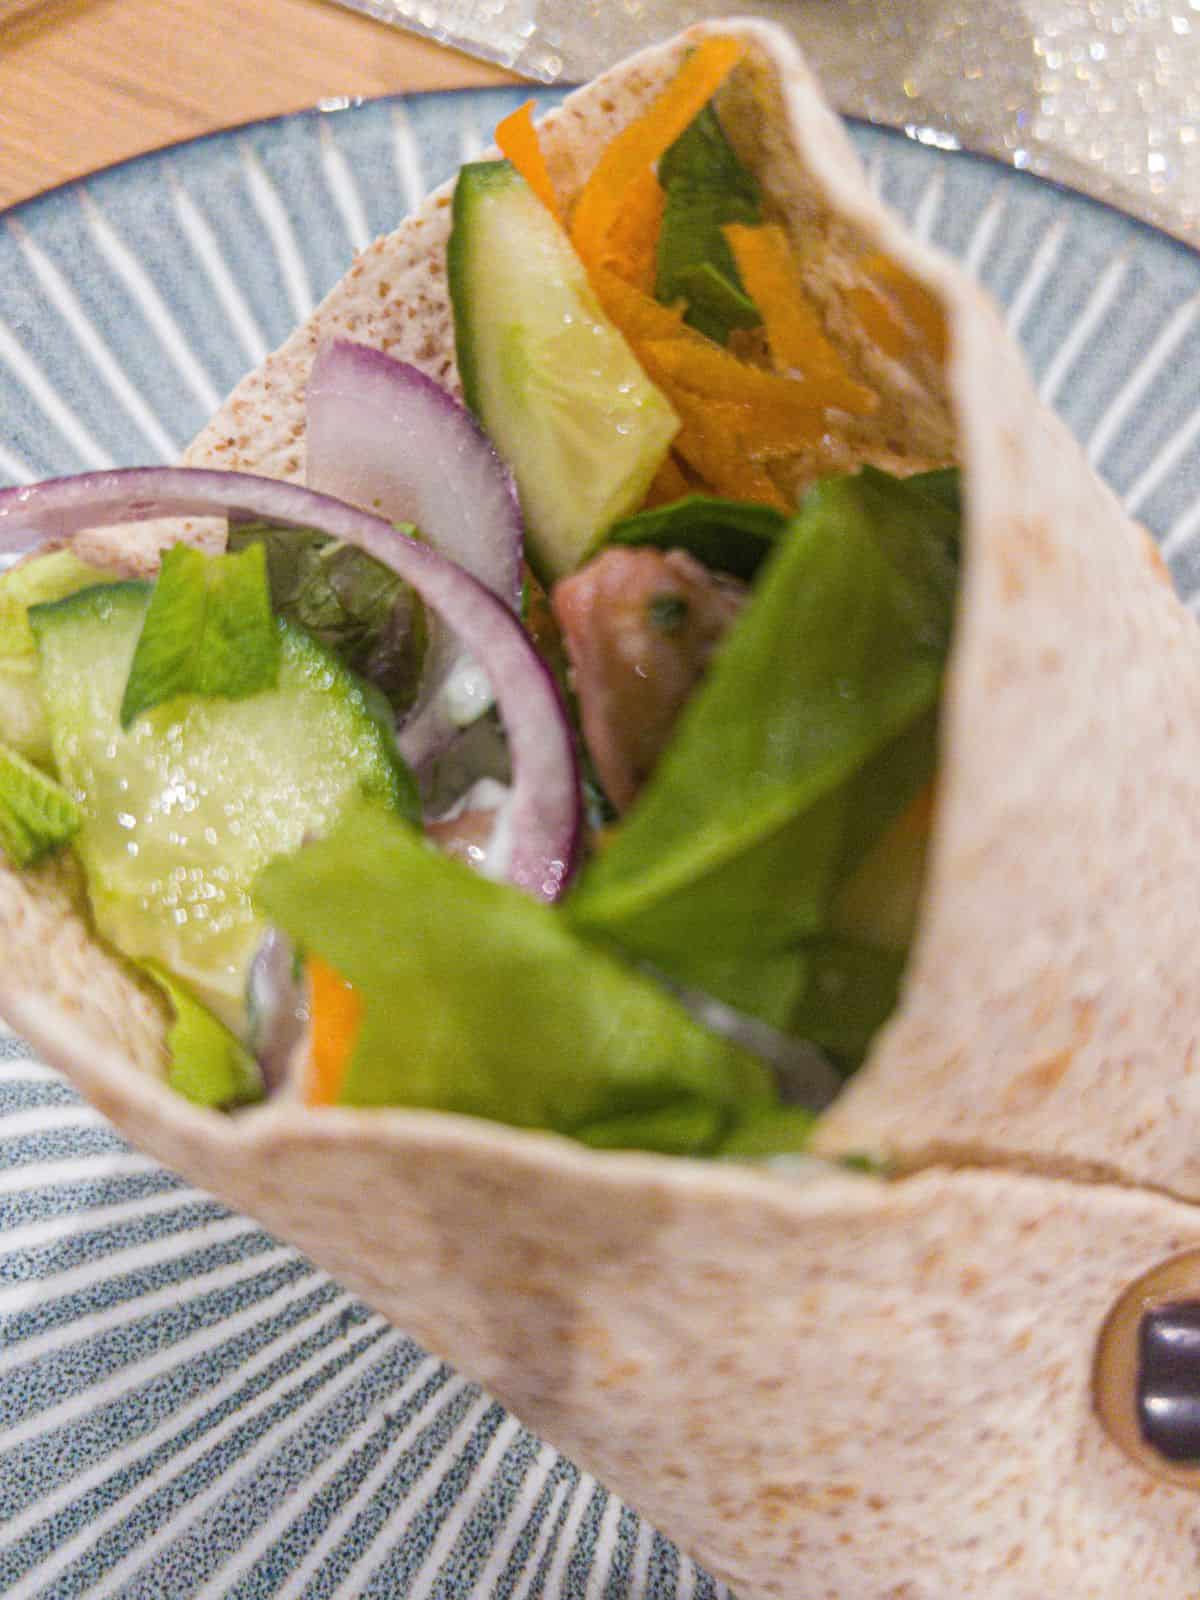 Wrap filled with lamb and salad.